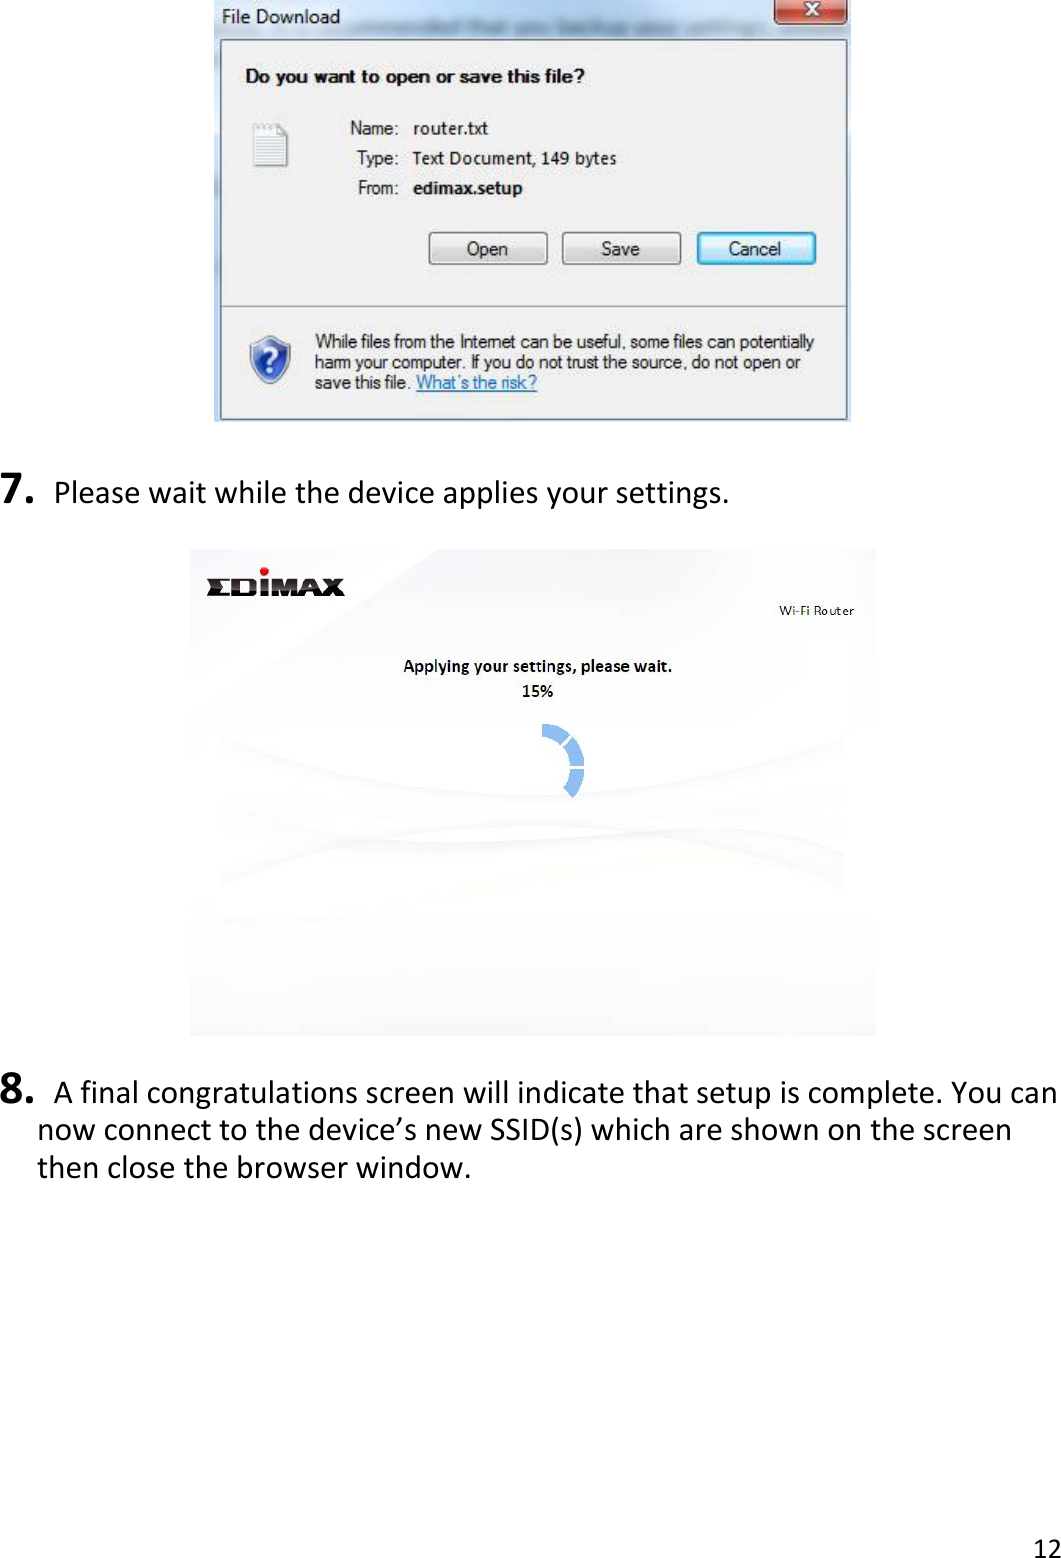 12    7.   Please wait while the device applies your settings.    8.  A final congratulations screen will indicate that setup is complete. You can now connect to the device’s new SSID(s) which are shown on the screen then close the browser window.  